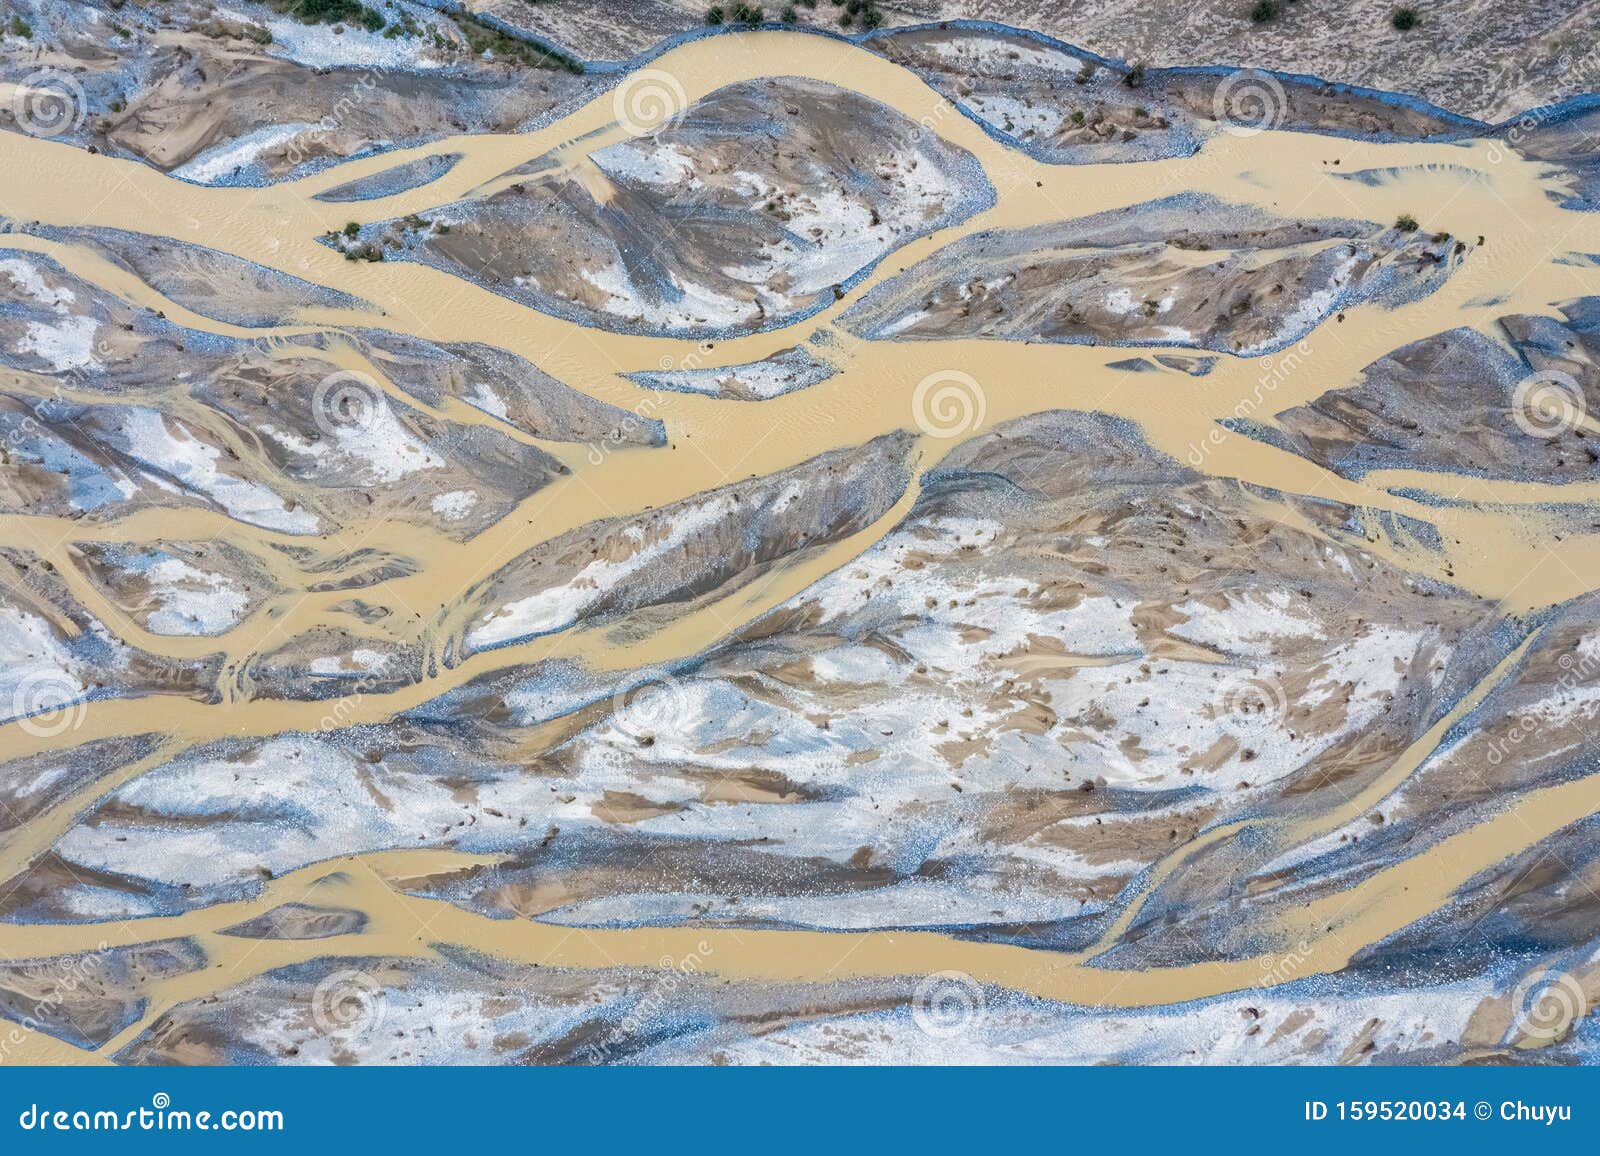 Aerial View of Kunlun River, Riverbed Texture Background Stock Photo ...